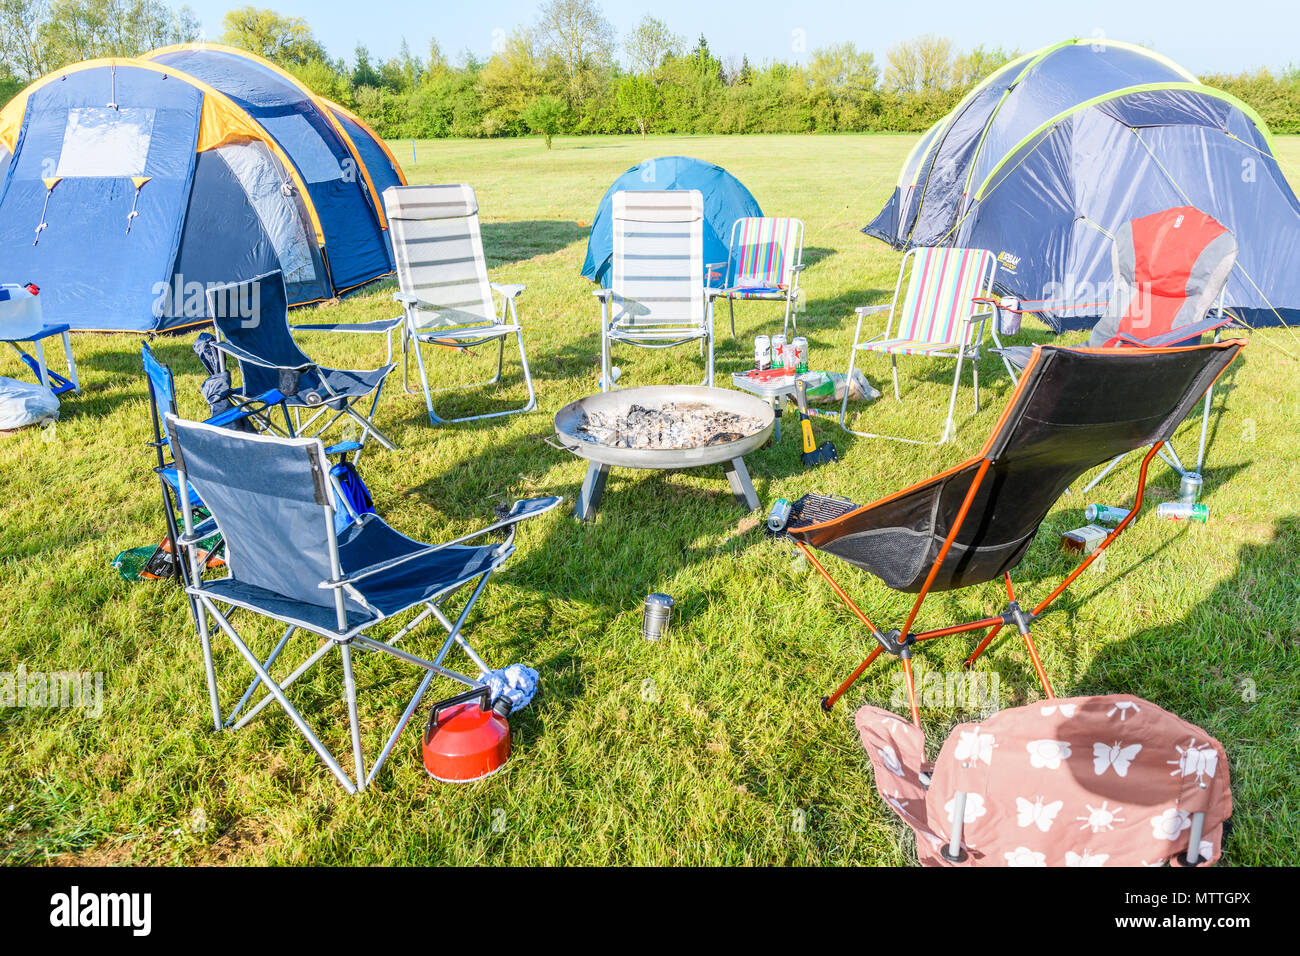 A group of chairs and tents around a camp fire in a green field on a hot sunny day. Stock Photo